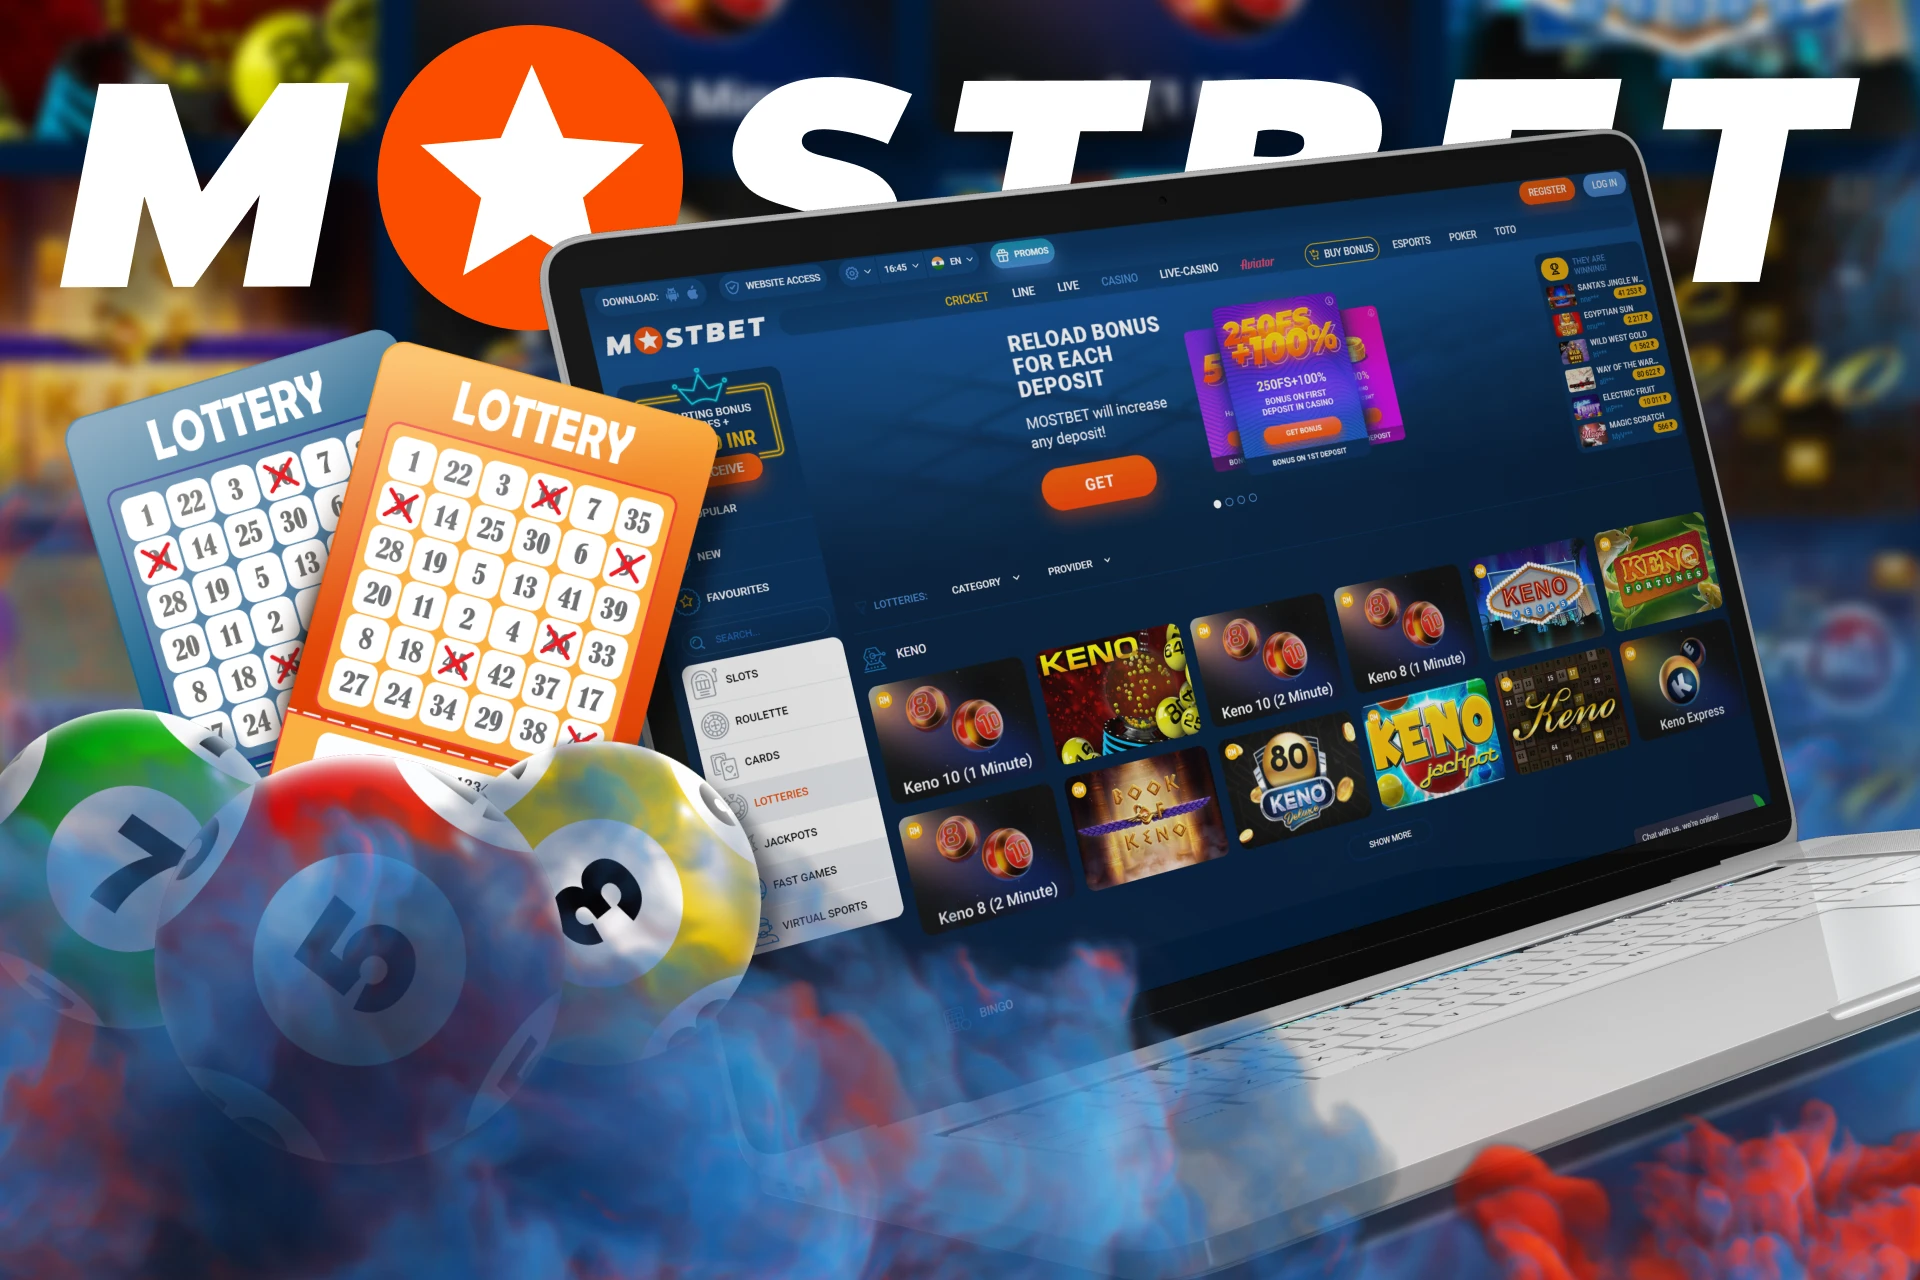 Try Mostbet casino in demo mode to get acquainted with lotteries.